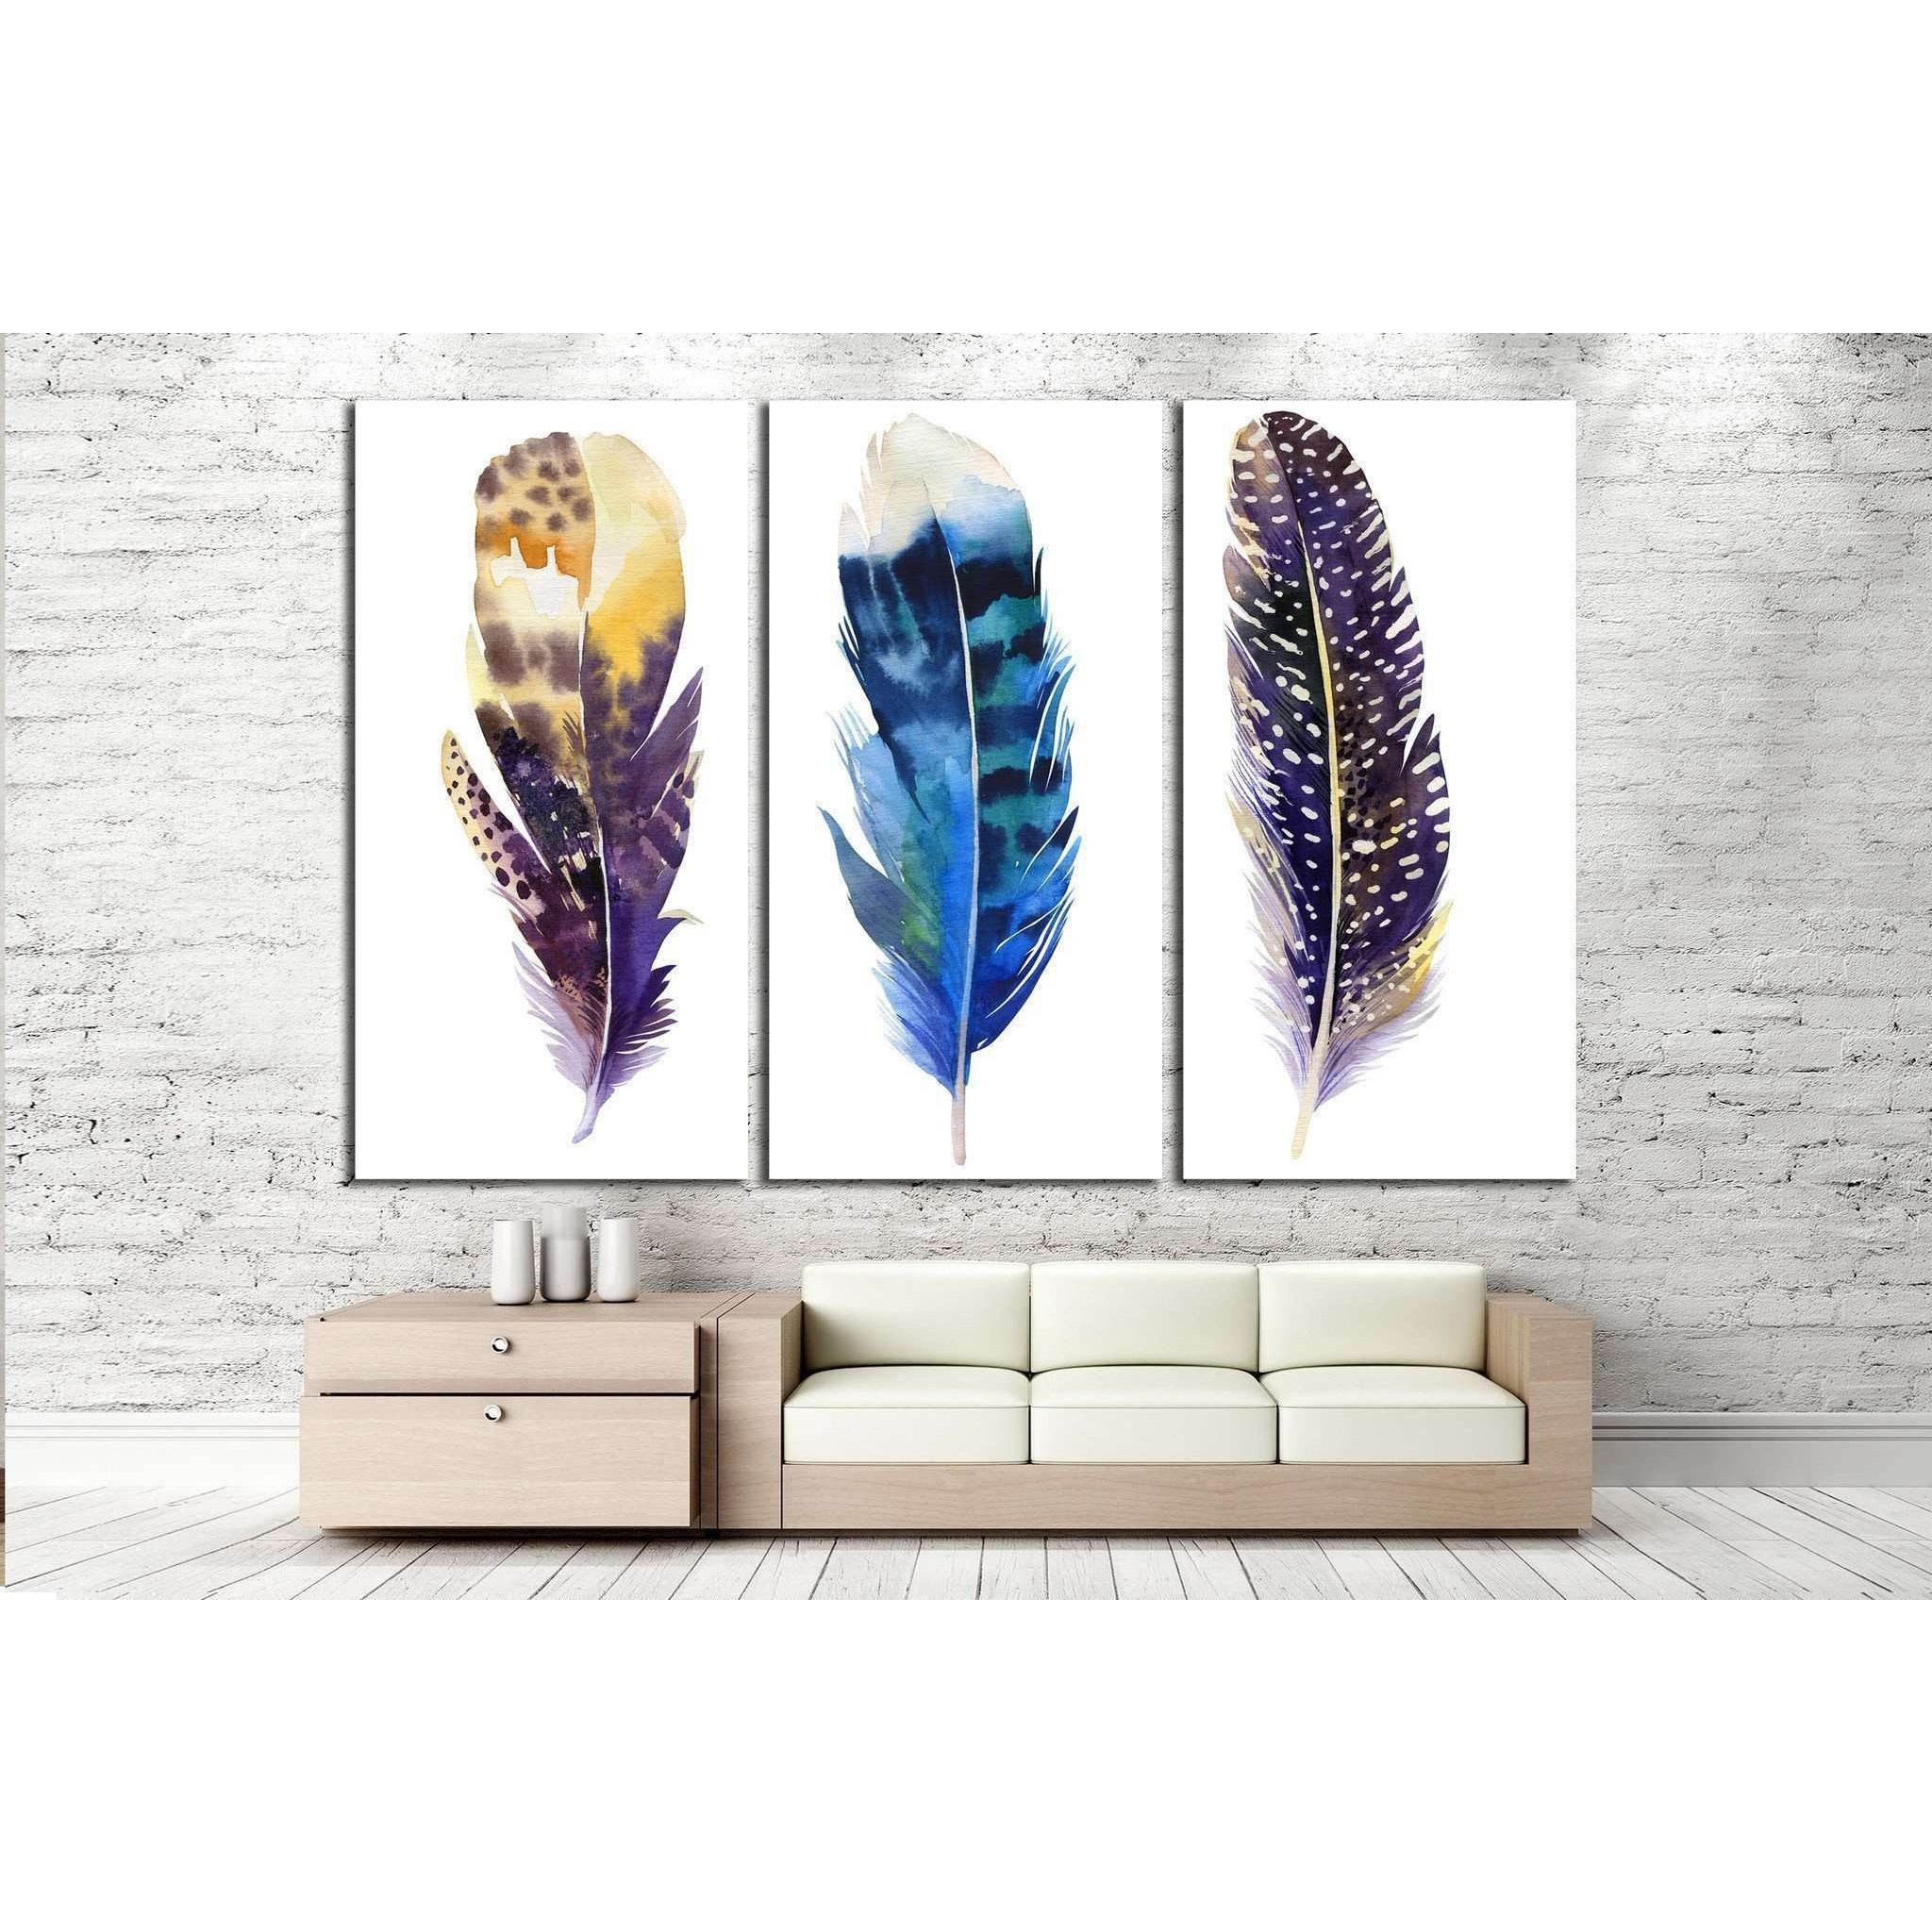 Boho feather set №733 Gallery Wrapped Canvas Art